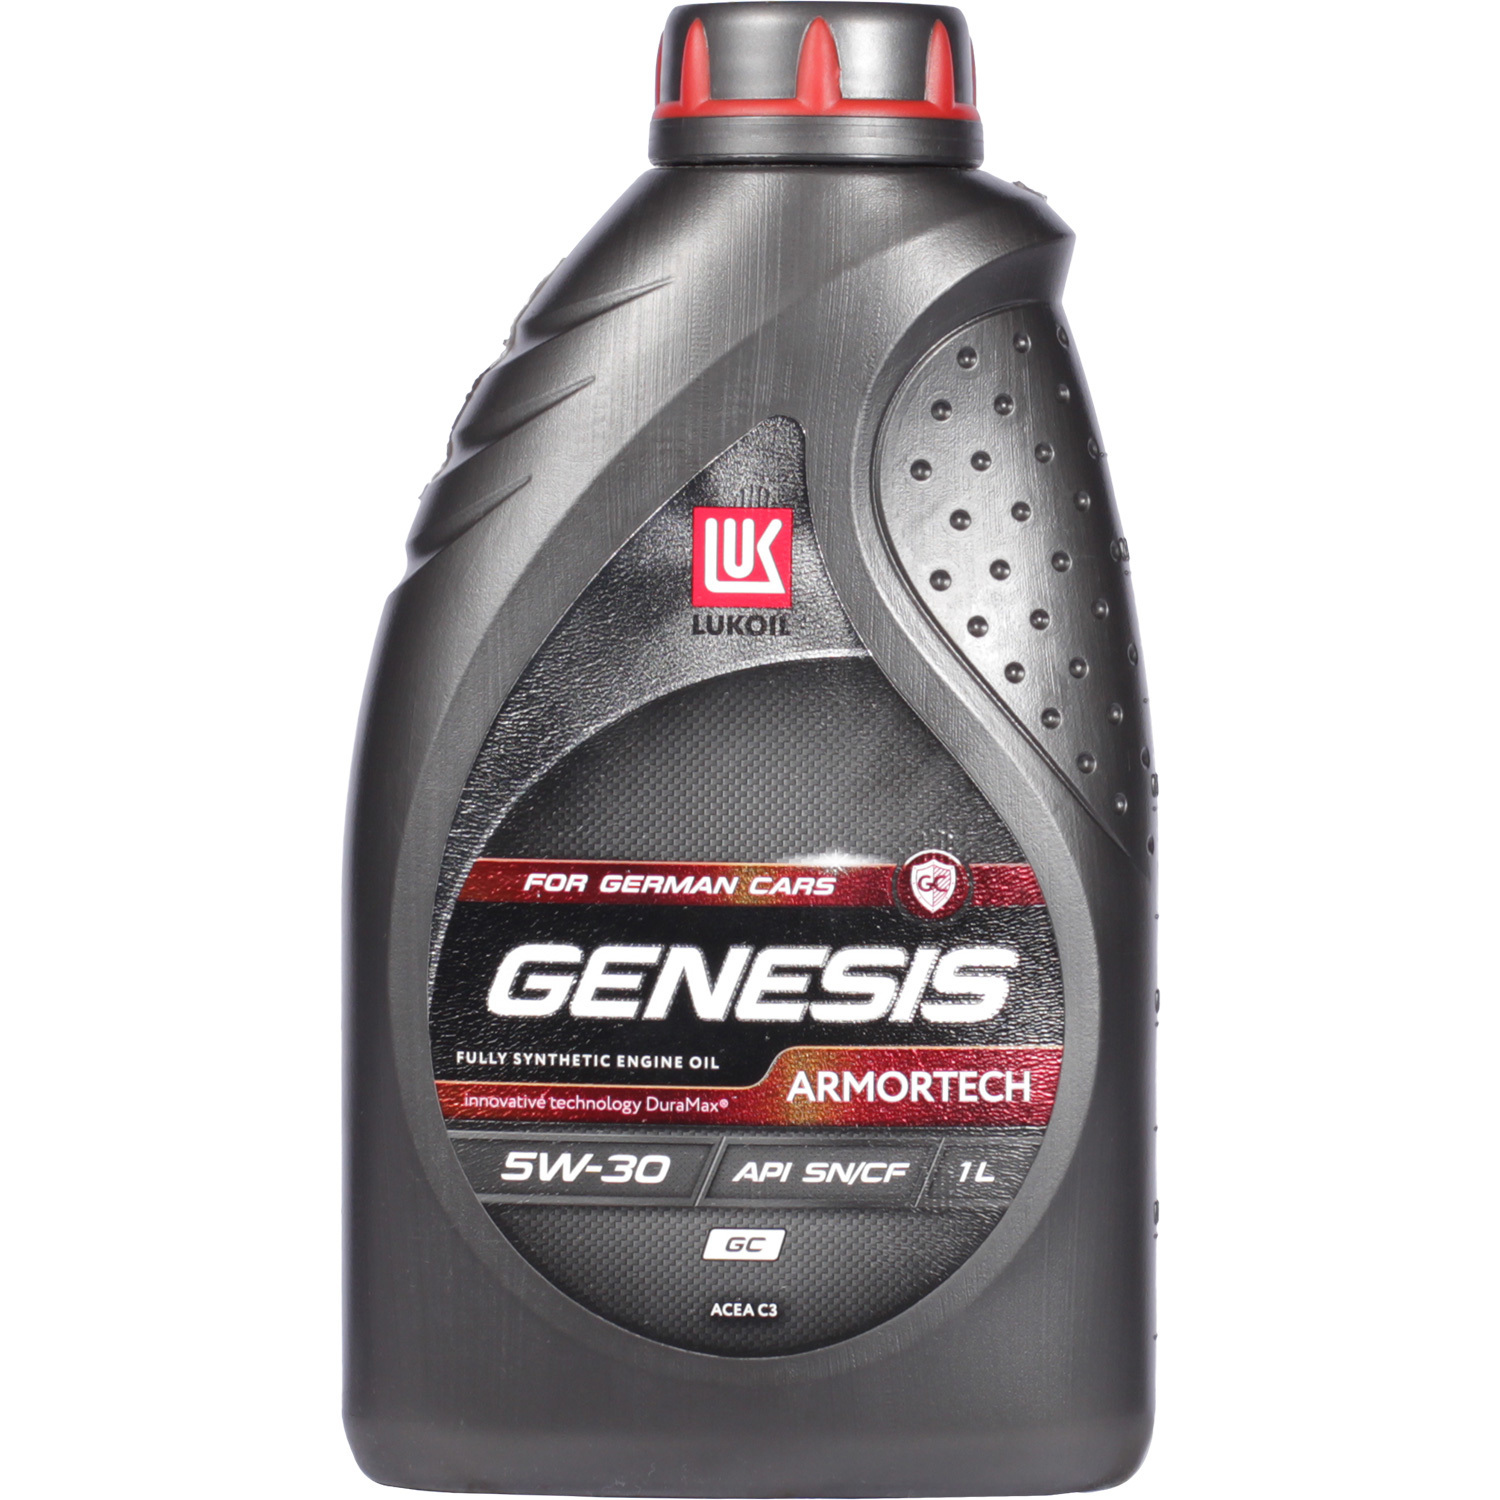 Lukoil Моторное масло Lukoil Genesis Armortech GC 5W-30, 1 л lukoil моторное масло lukoil genesis armortech 5w 40 1 л